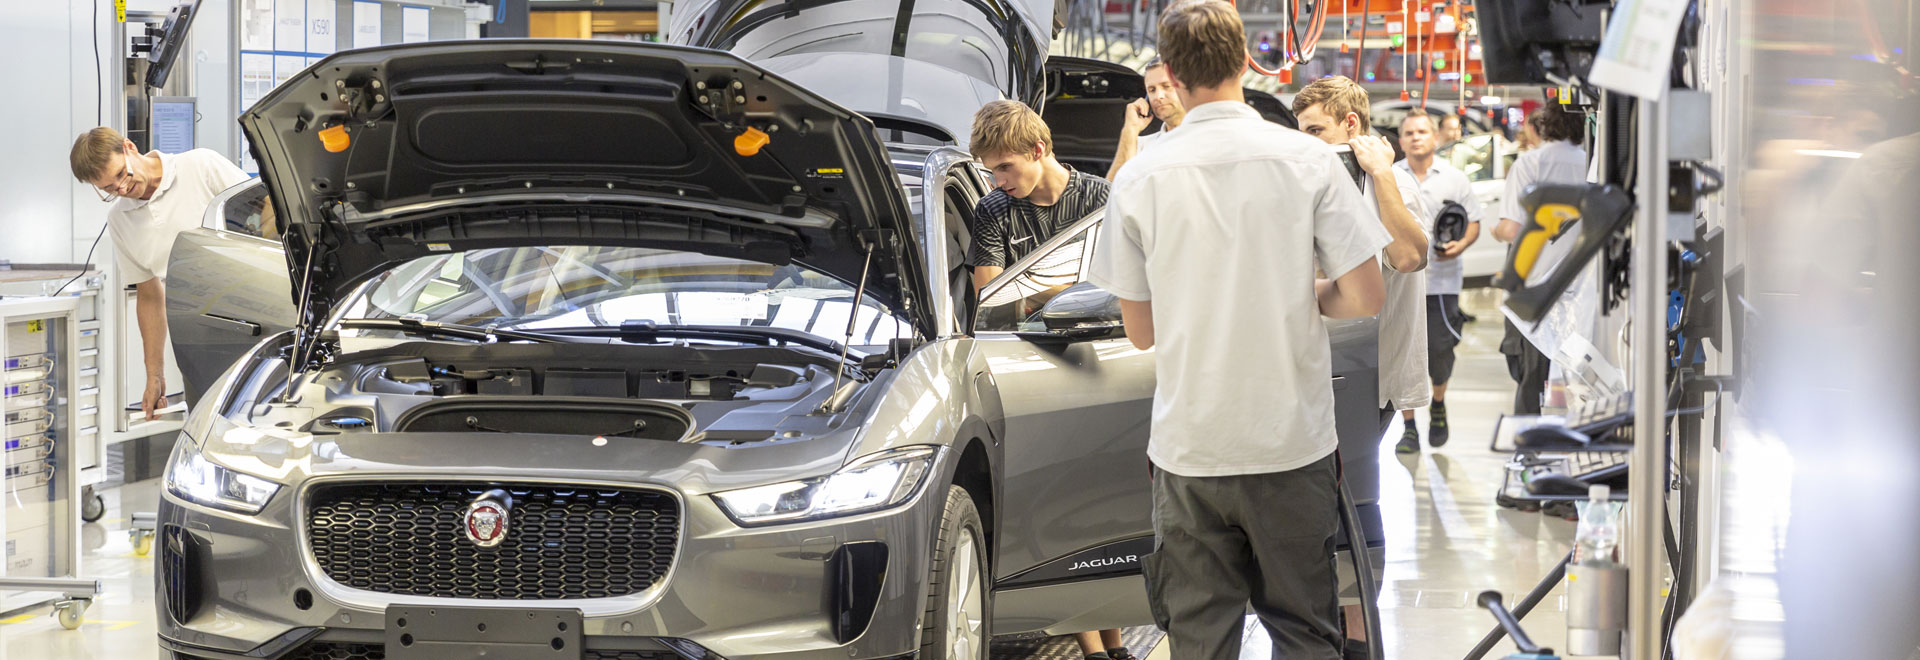 Flexible Manufacturing solutions in the automotive industry